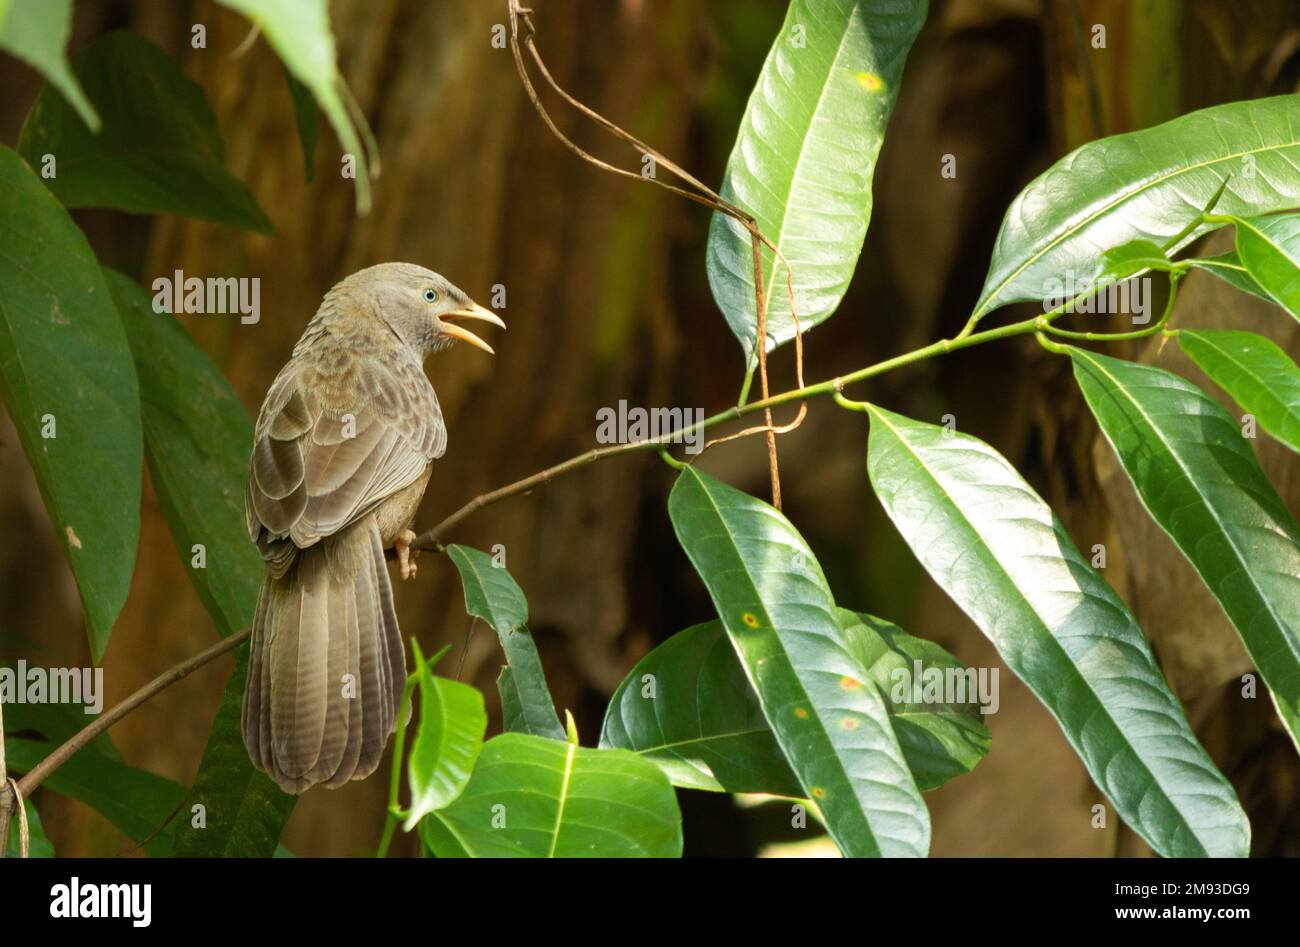 The jungle babbler (Argya striata) is a member of the family Leiothrichidae found in the Indian subcontinent. Stock Photo